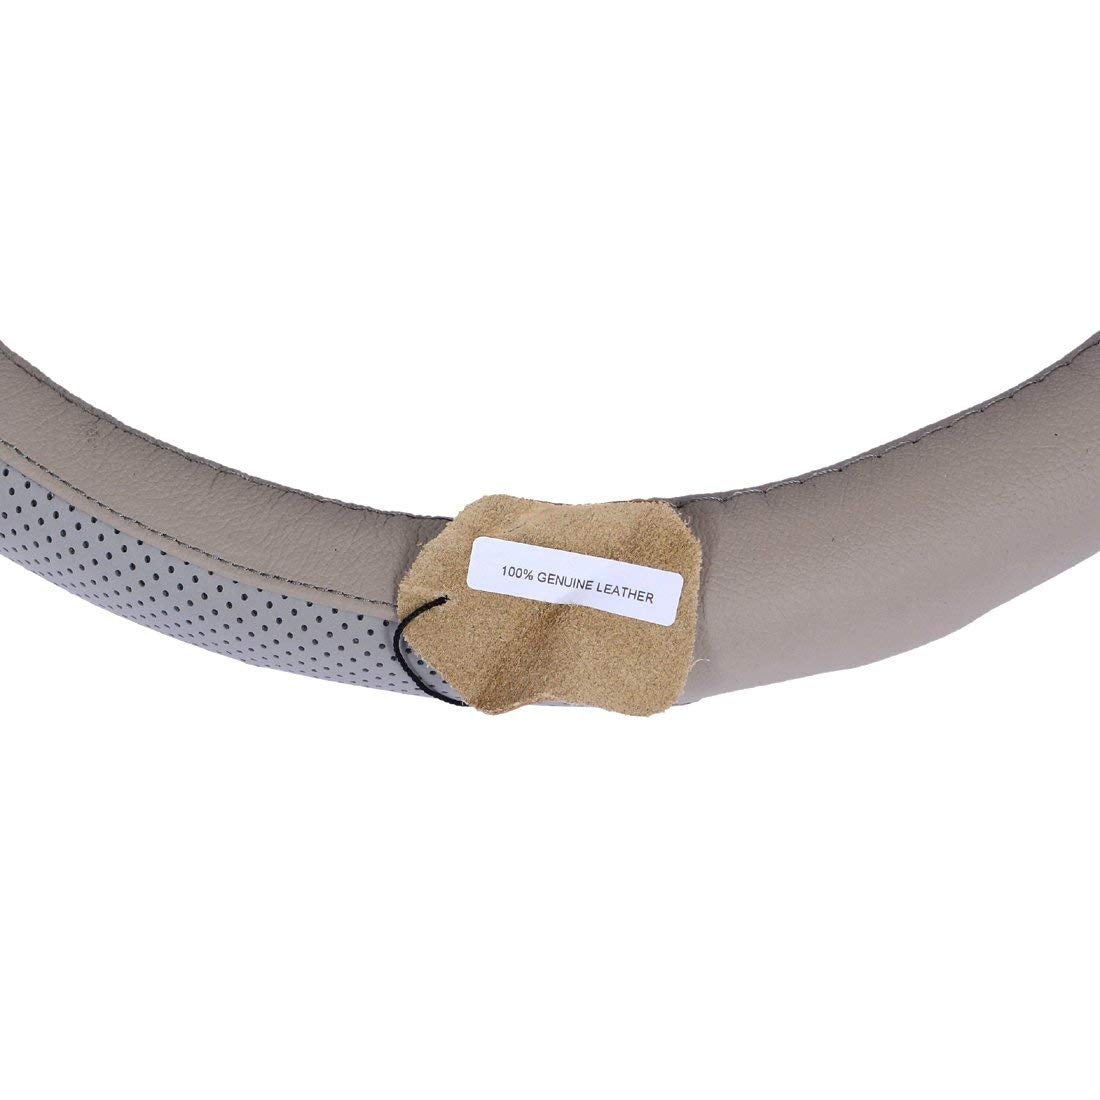 Oshotto SC-004 Leather Car Steering Cover (Beige and Grey,Medium)